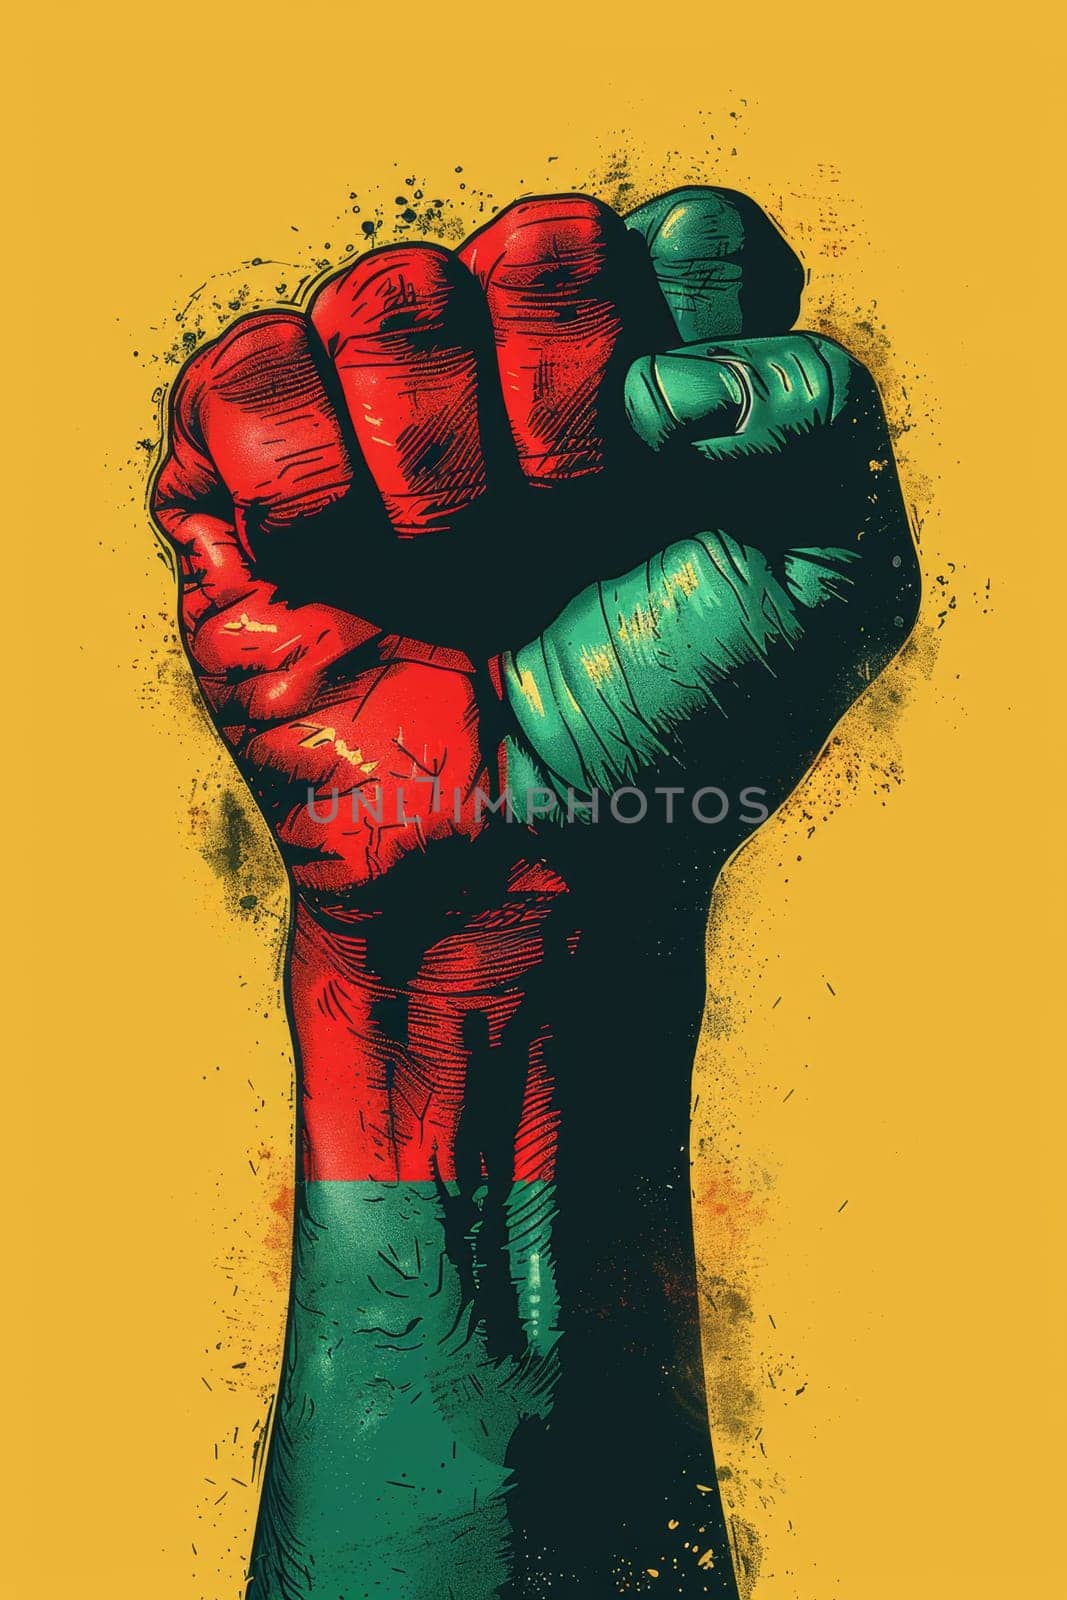 A fist symbolizing the abolition of slavery on a yellow isolated background. Illustration by Lobachad